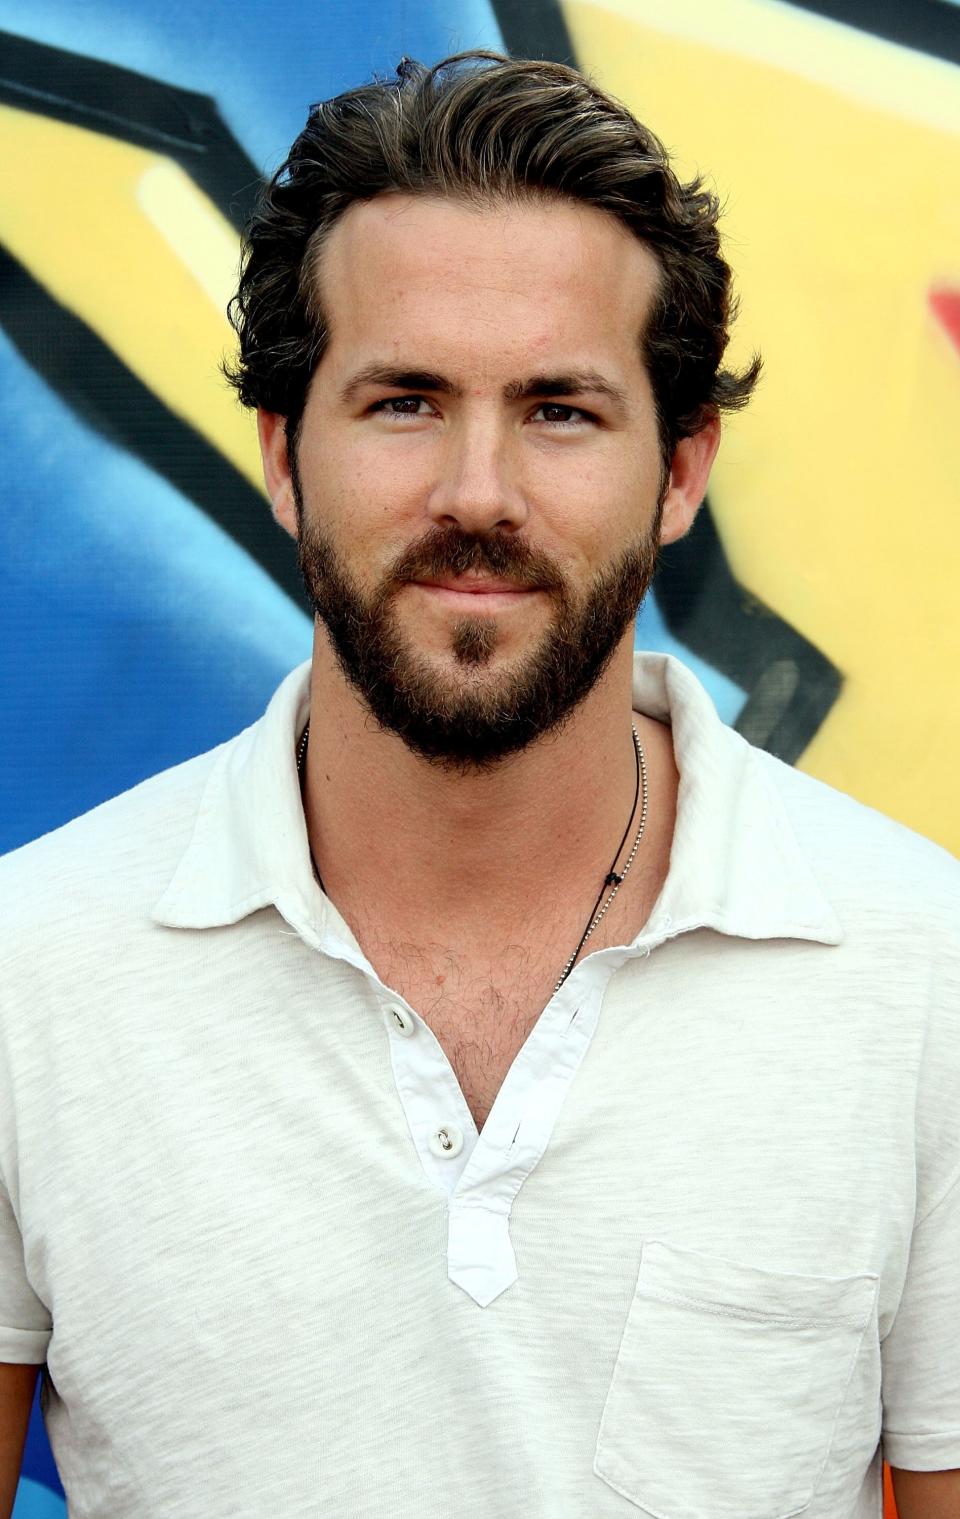 Ryan Reynolds smiling, wearing a casual white shirt with a slightly open collar, standing in front of a colorful background